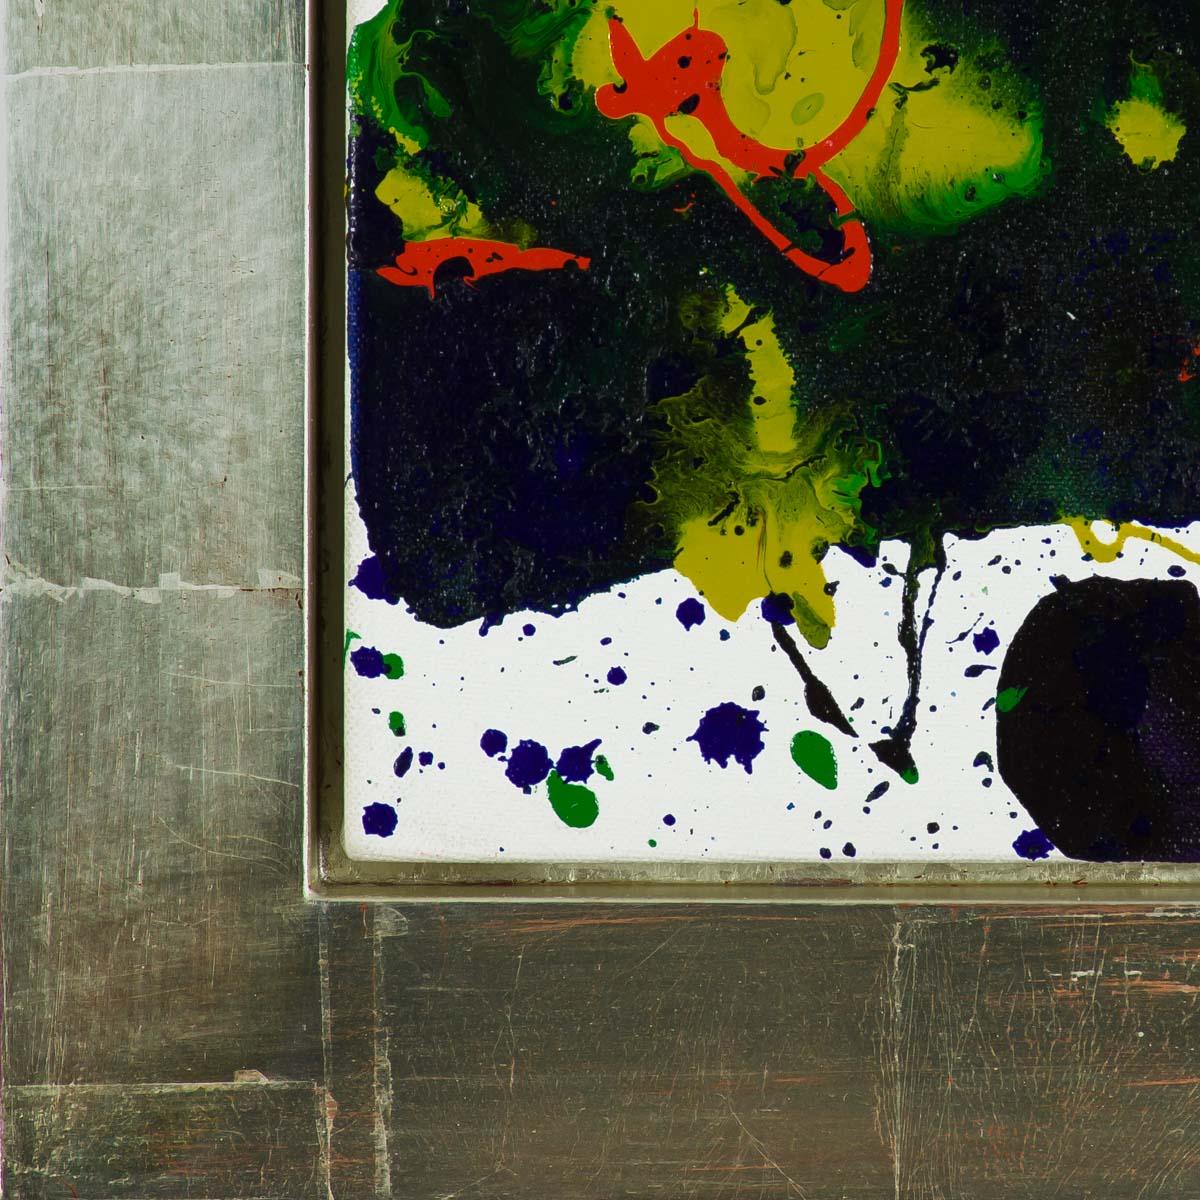 Untitled, 1994 (SFP94-36) - Abstract Expressionist Painting by Sam Francis